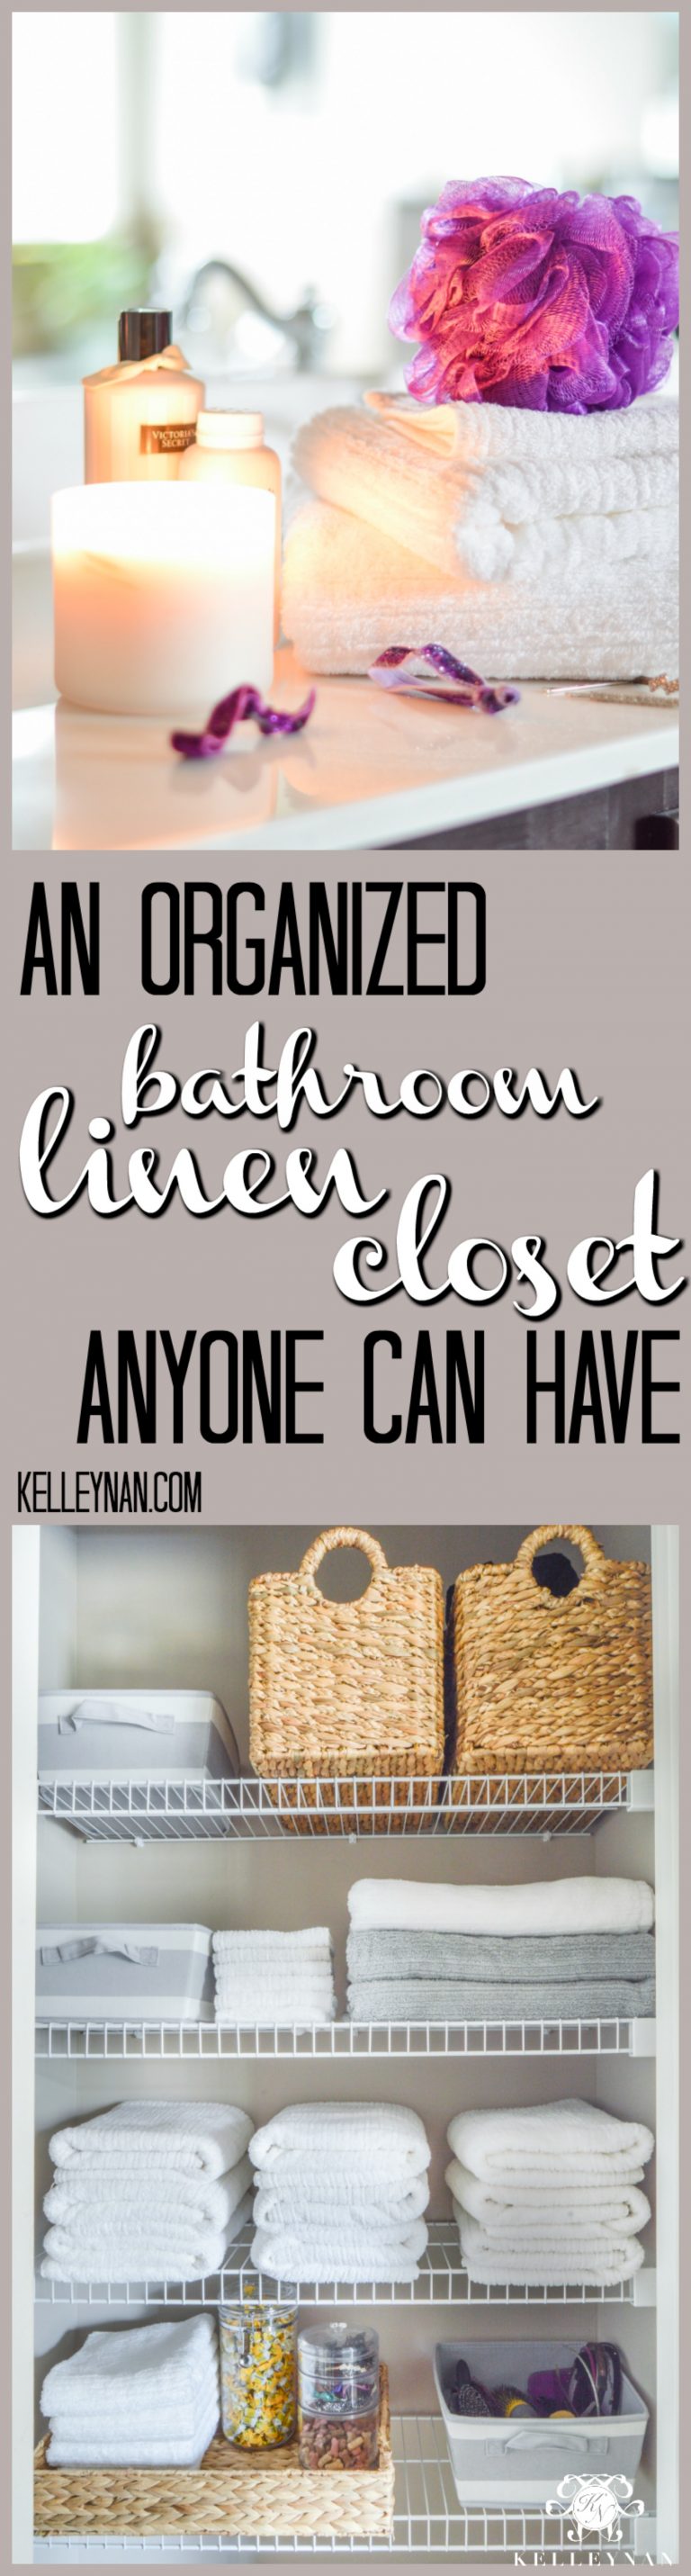 Between towels, hair products, soaps, etc., the bathroom is a place that can quickly get taken over by clutter. Don't allow it! Check out this organized bathroom space anyone can have.